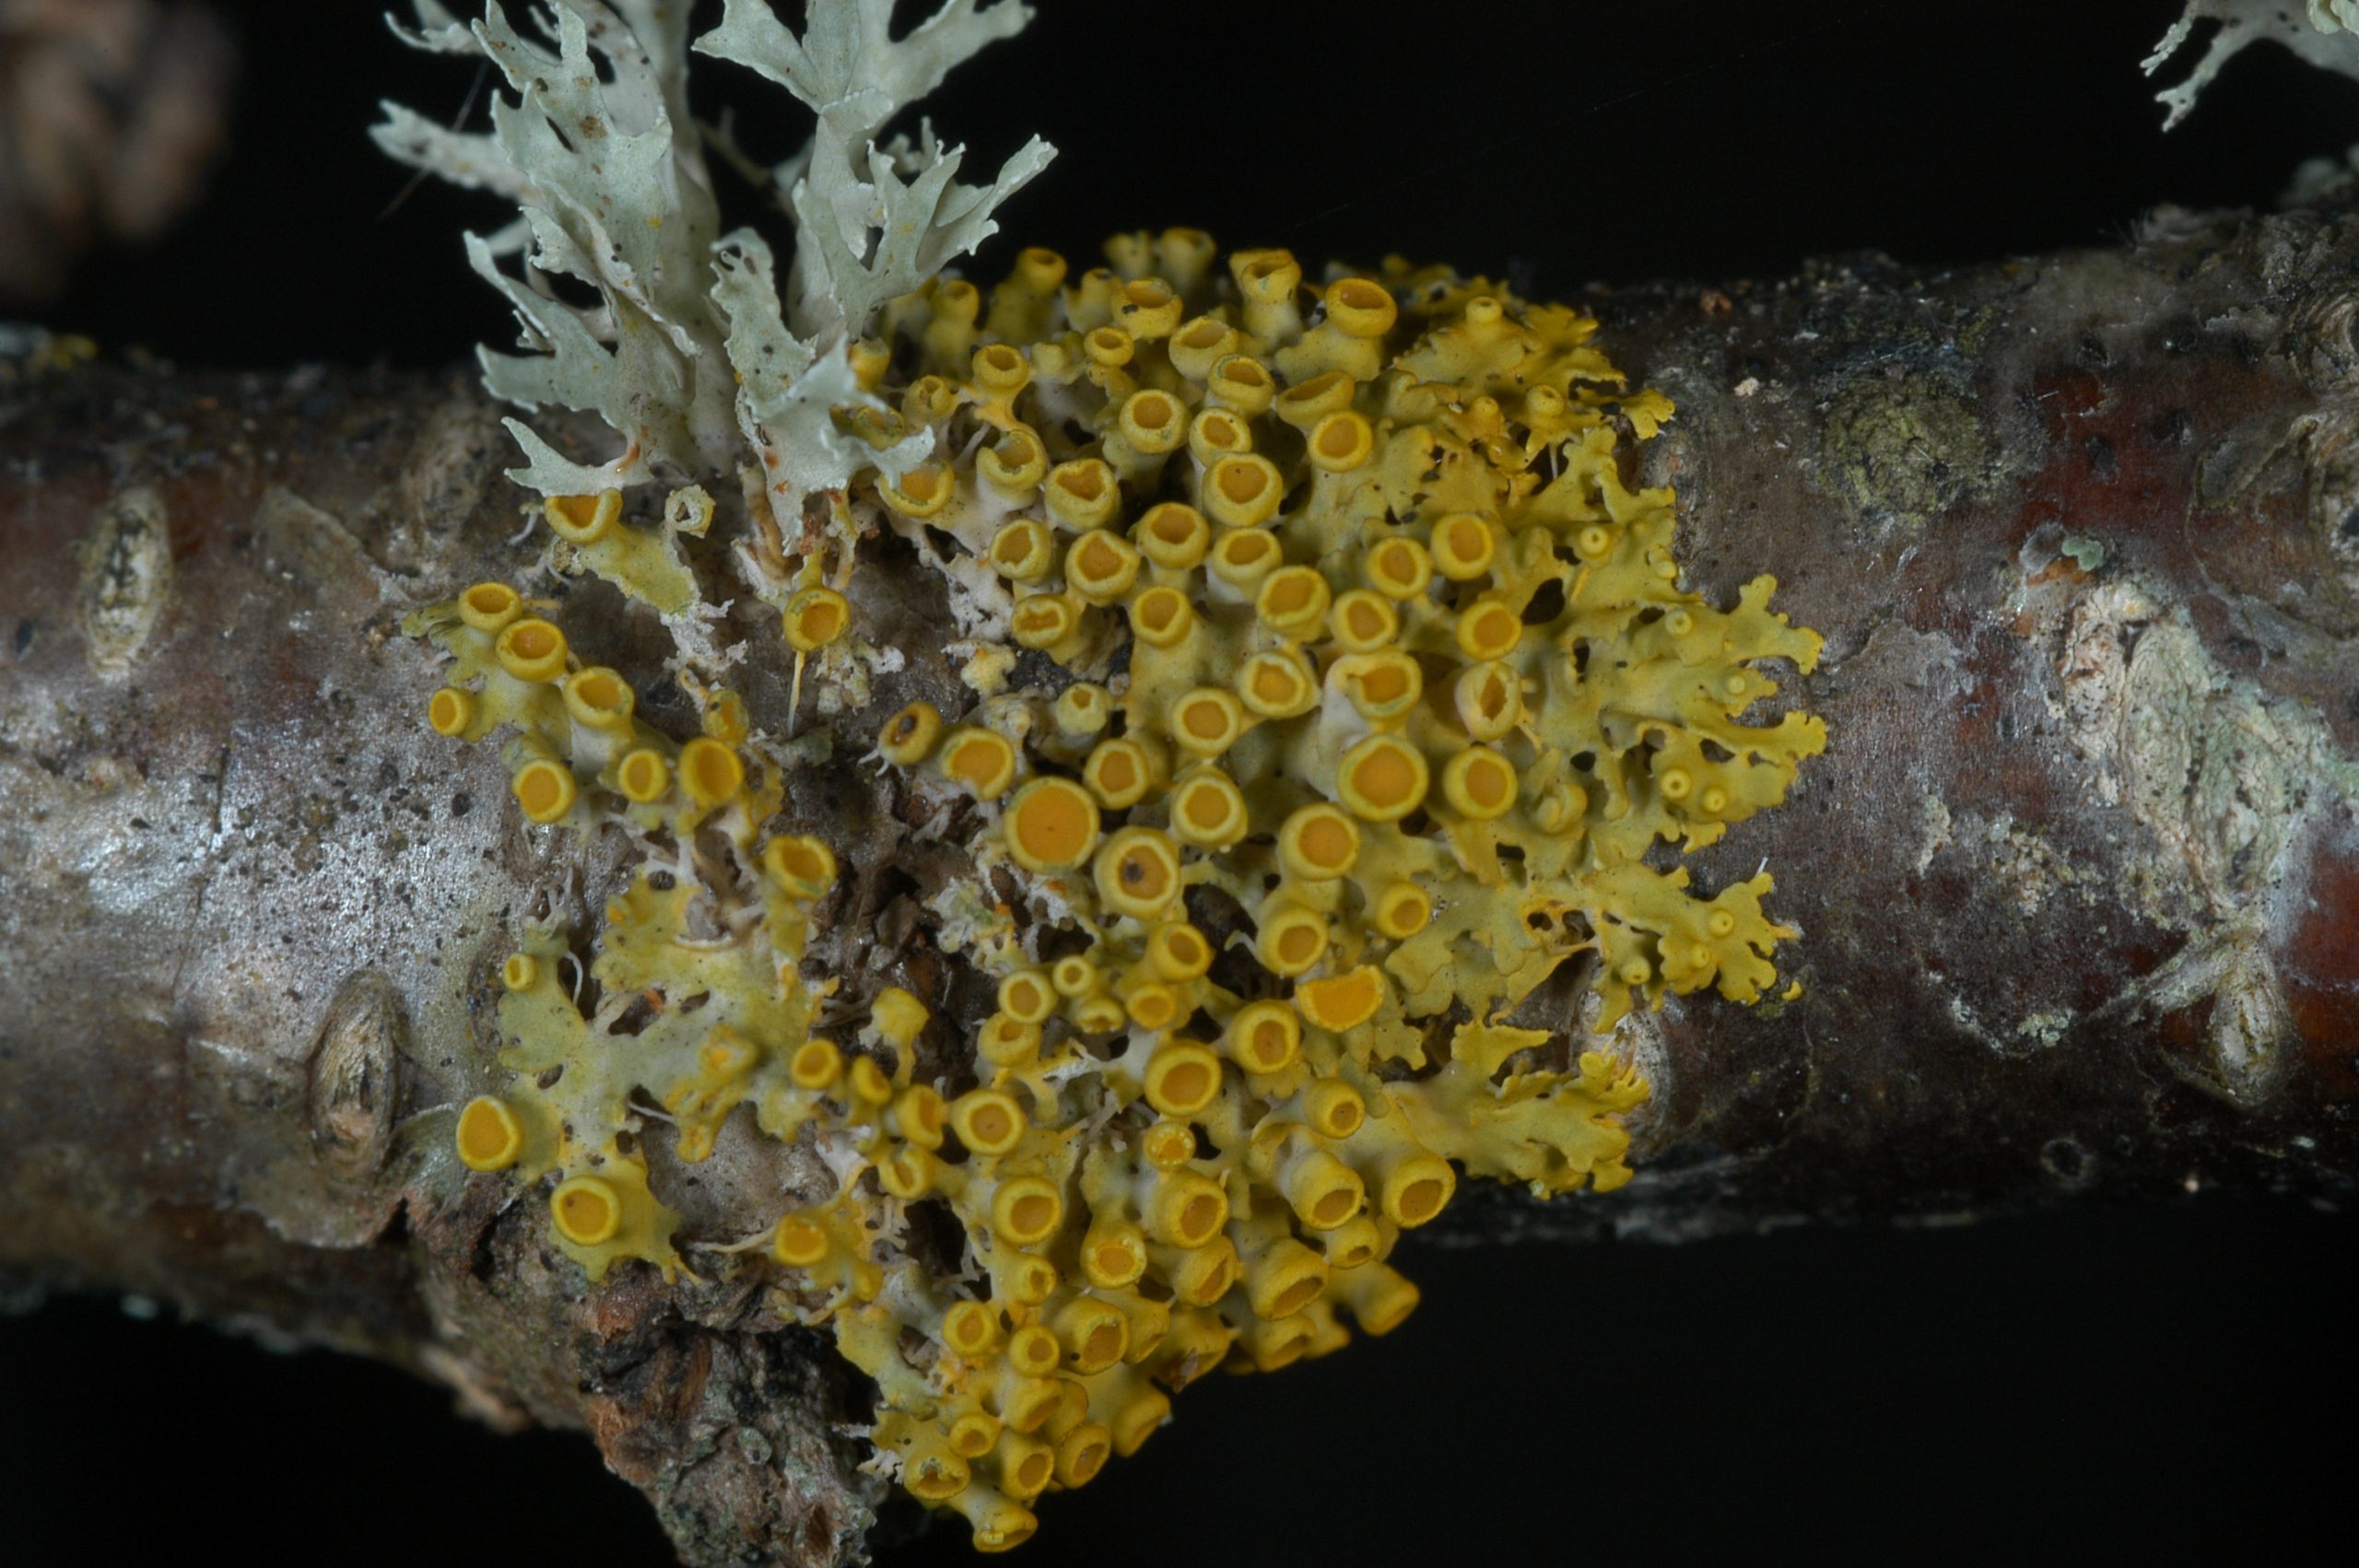 Lichen coloration is primarily due to pigments produced in their outer layers and which serve many functions, including sunscreening. This orange species, Xanthomendoza hasseana, is rare in the southern Appalachians where it grows on canopy branches in old-growth forests.